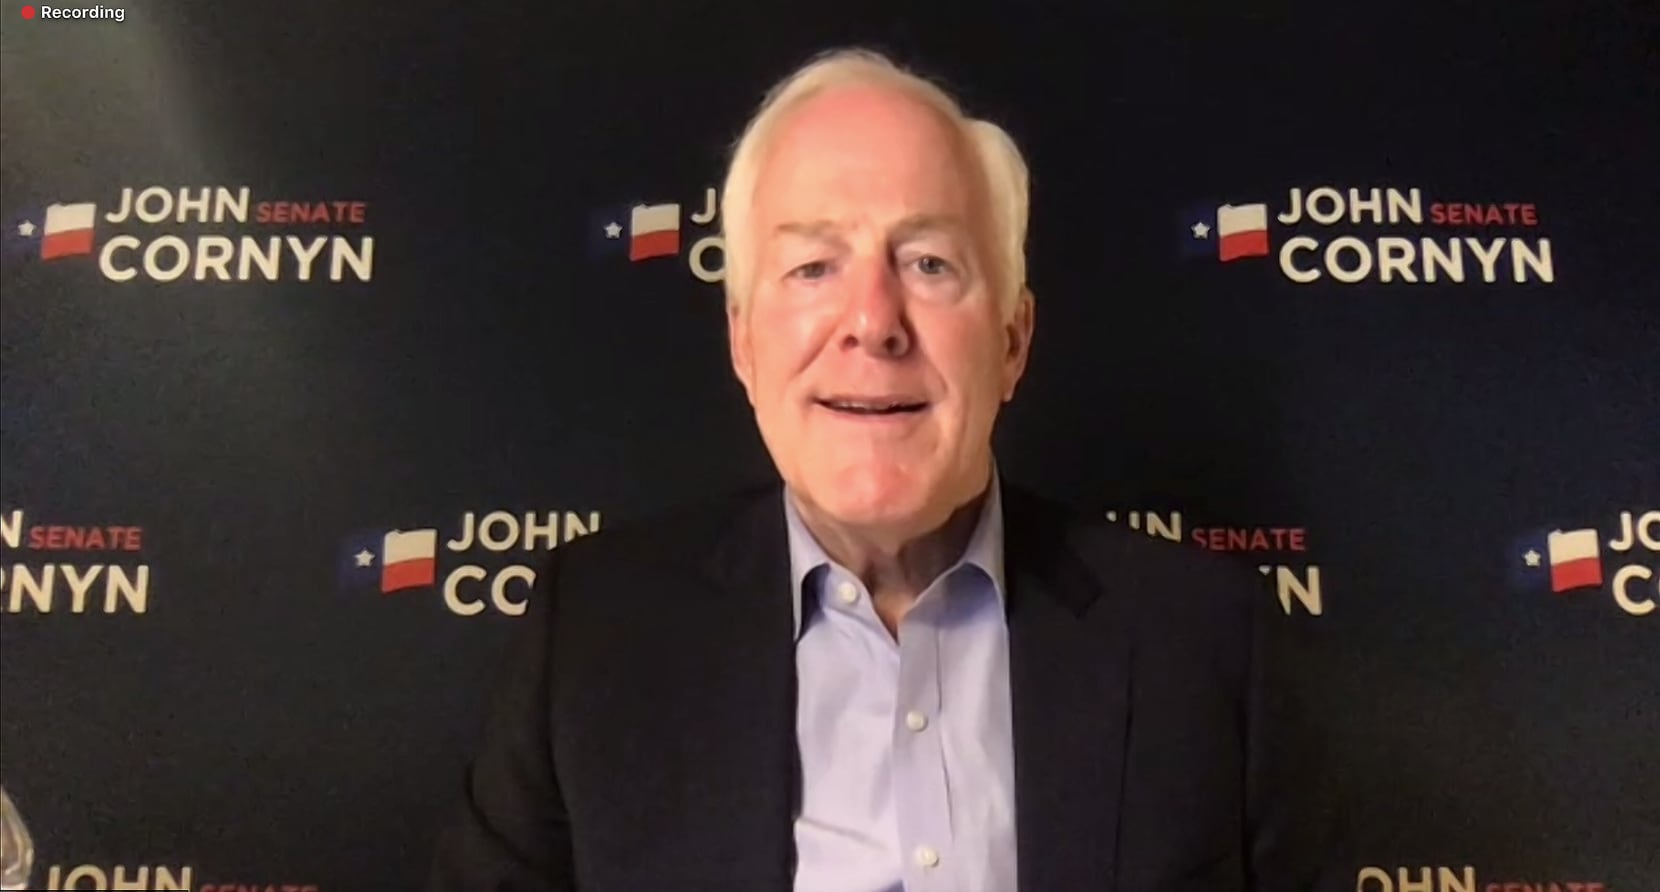 Sen. John Cornyn said he was pleased his paid advertising in his successful re-election bid...